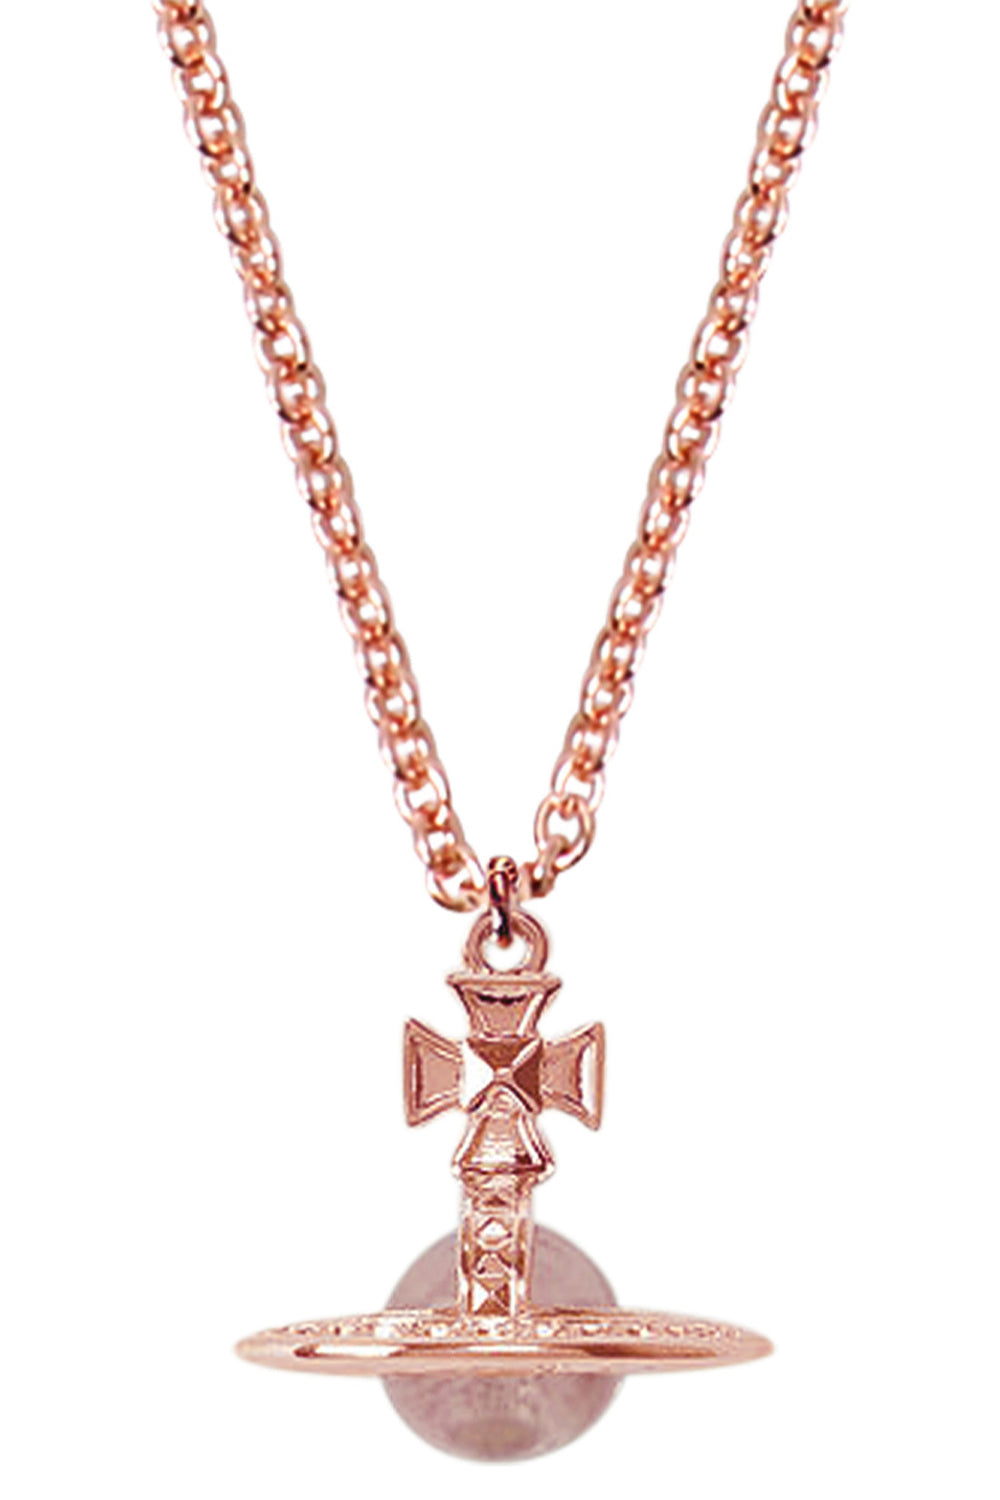 VIVIENNE WESTWOOD Accessories MULTI PINA SMALL ORB PENDANT | PINK GOLD/ROSE